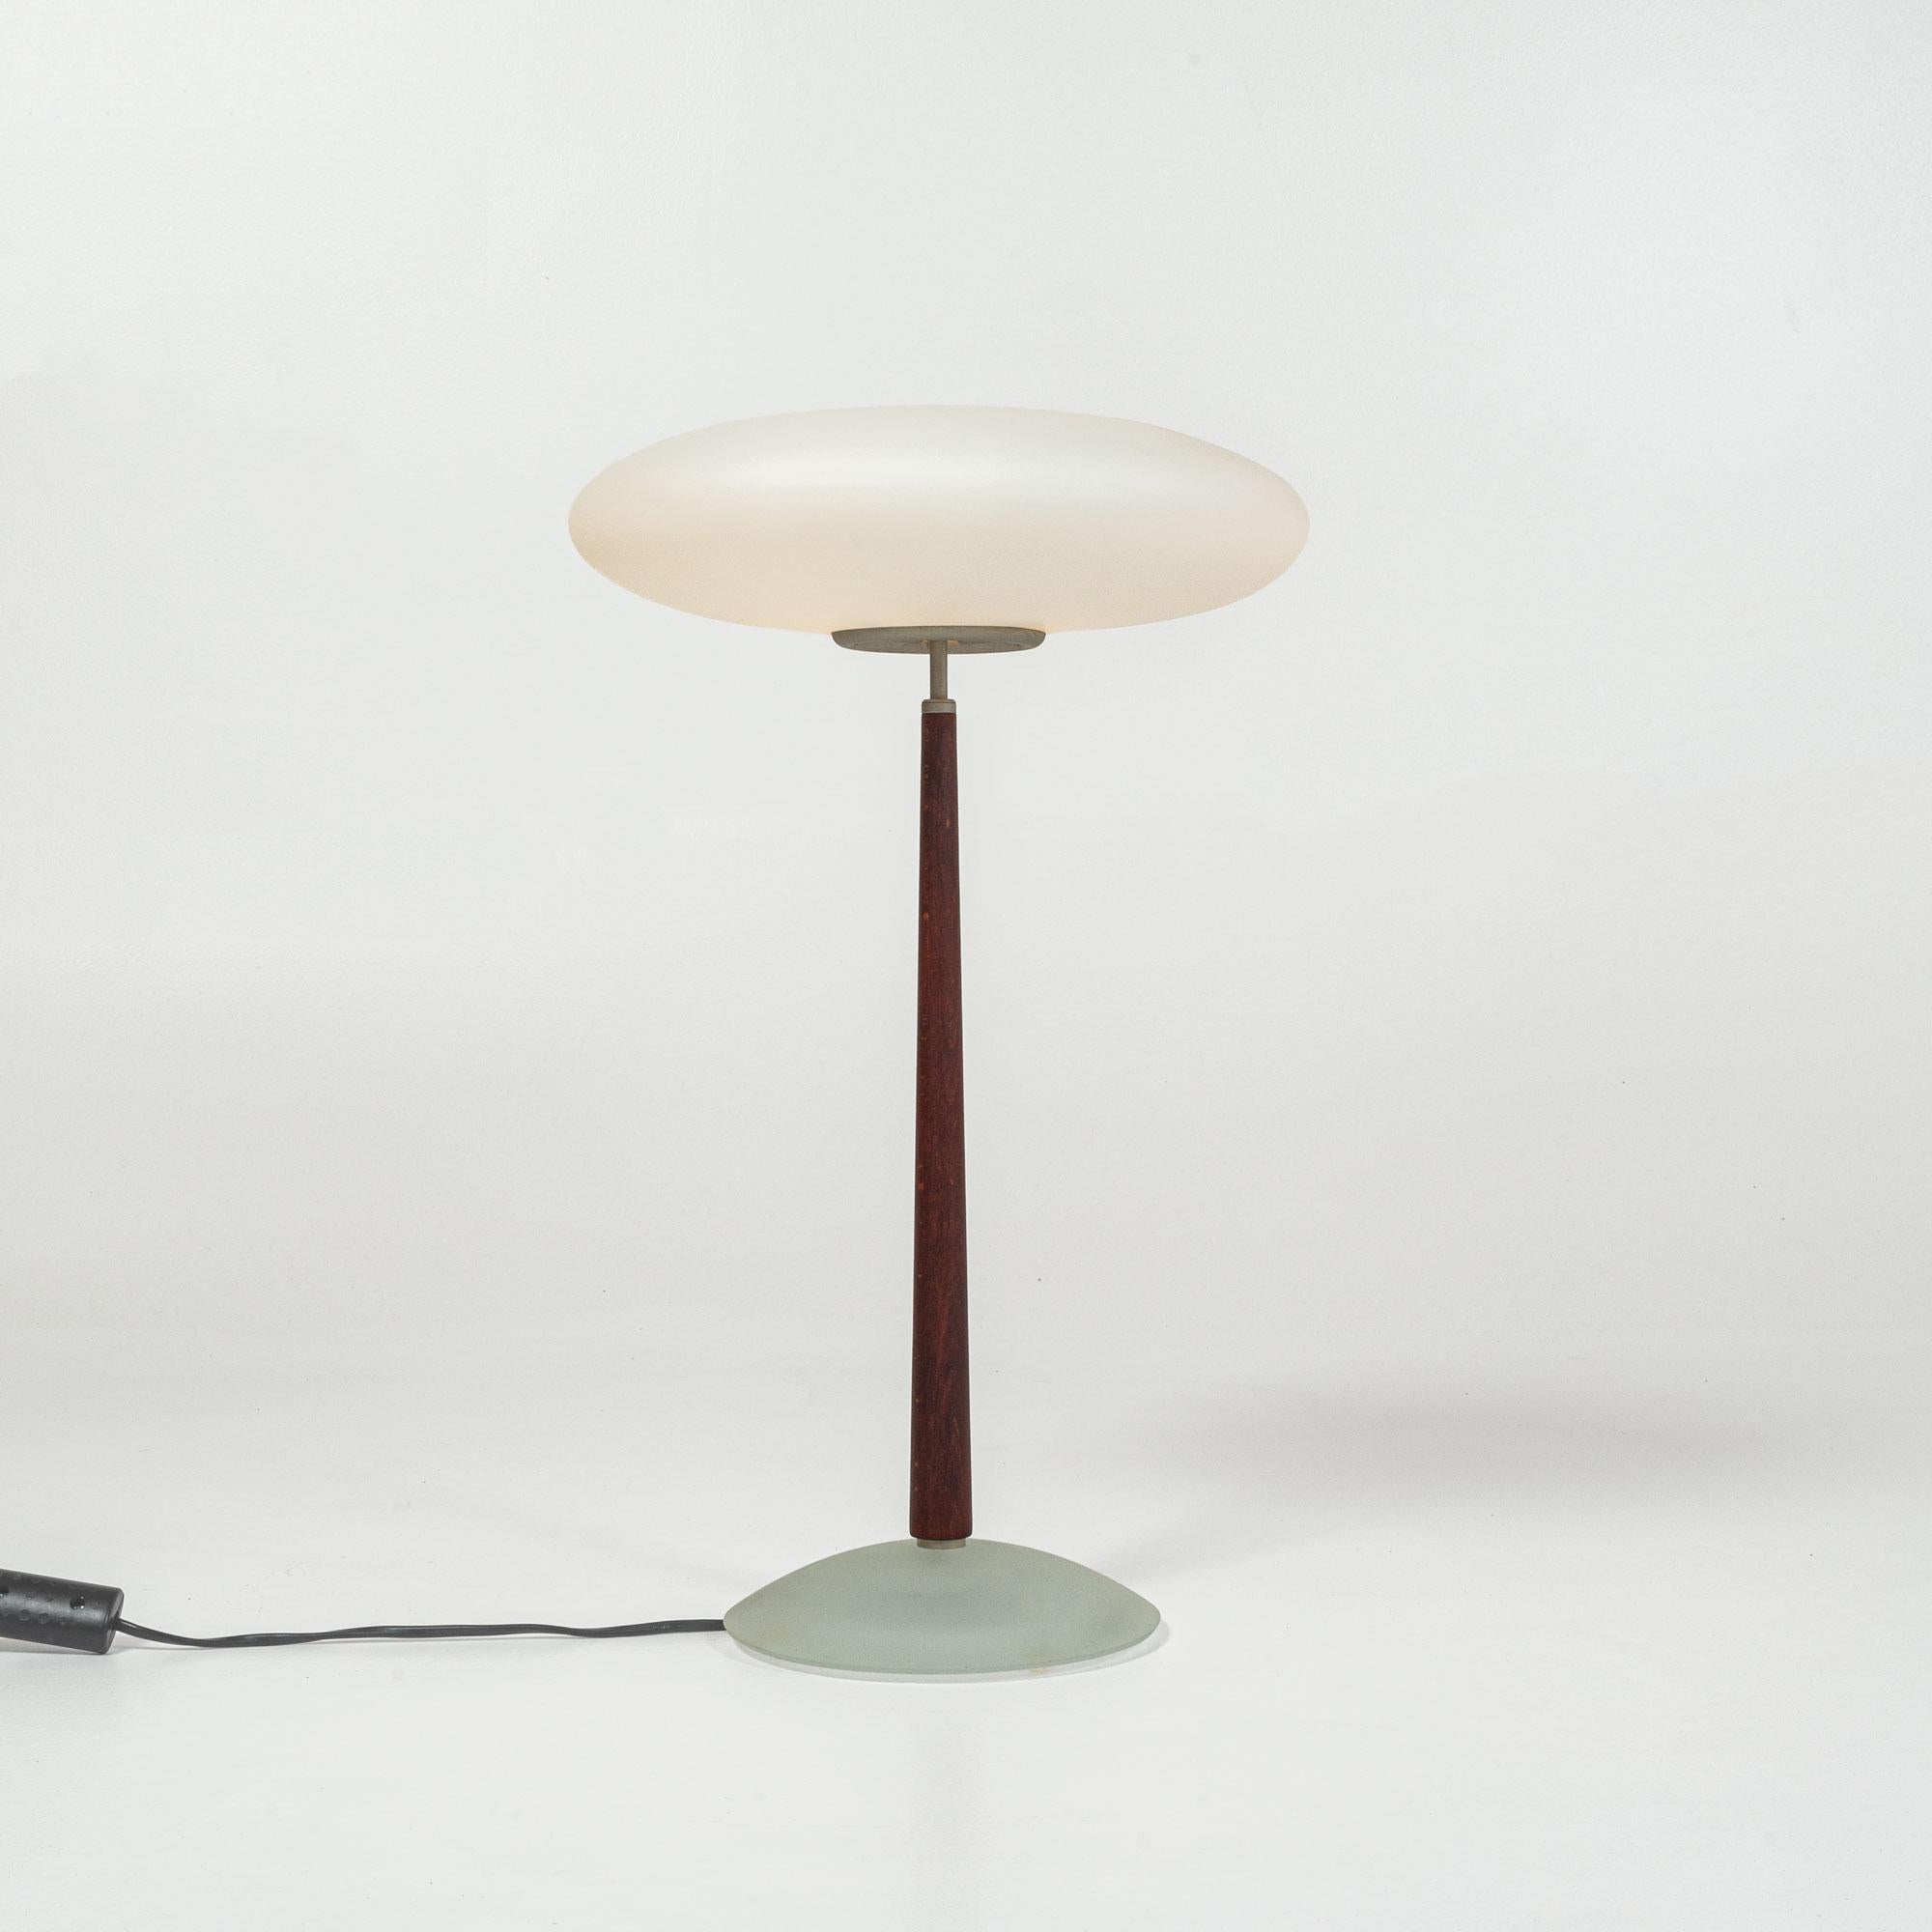 Vintage mushroom table lamp designed by Matteo Thun for Arteluce, Made in Italy.
 